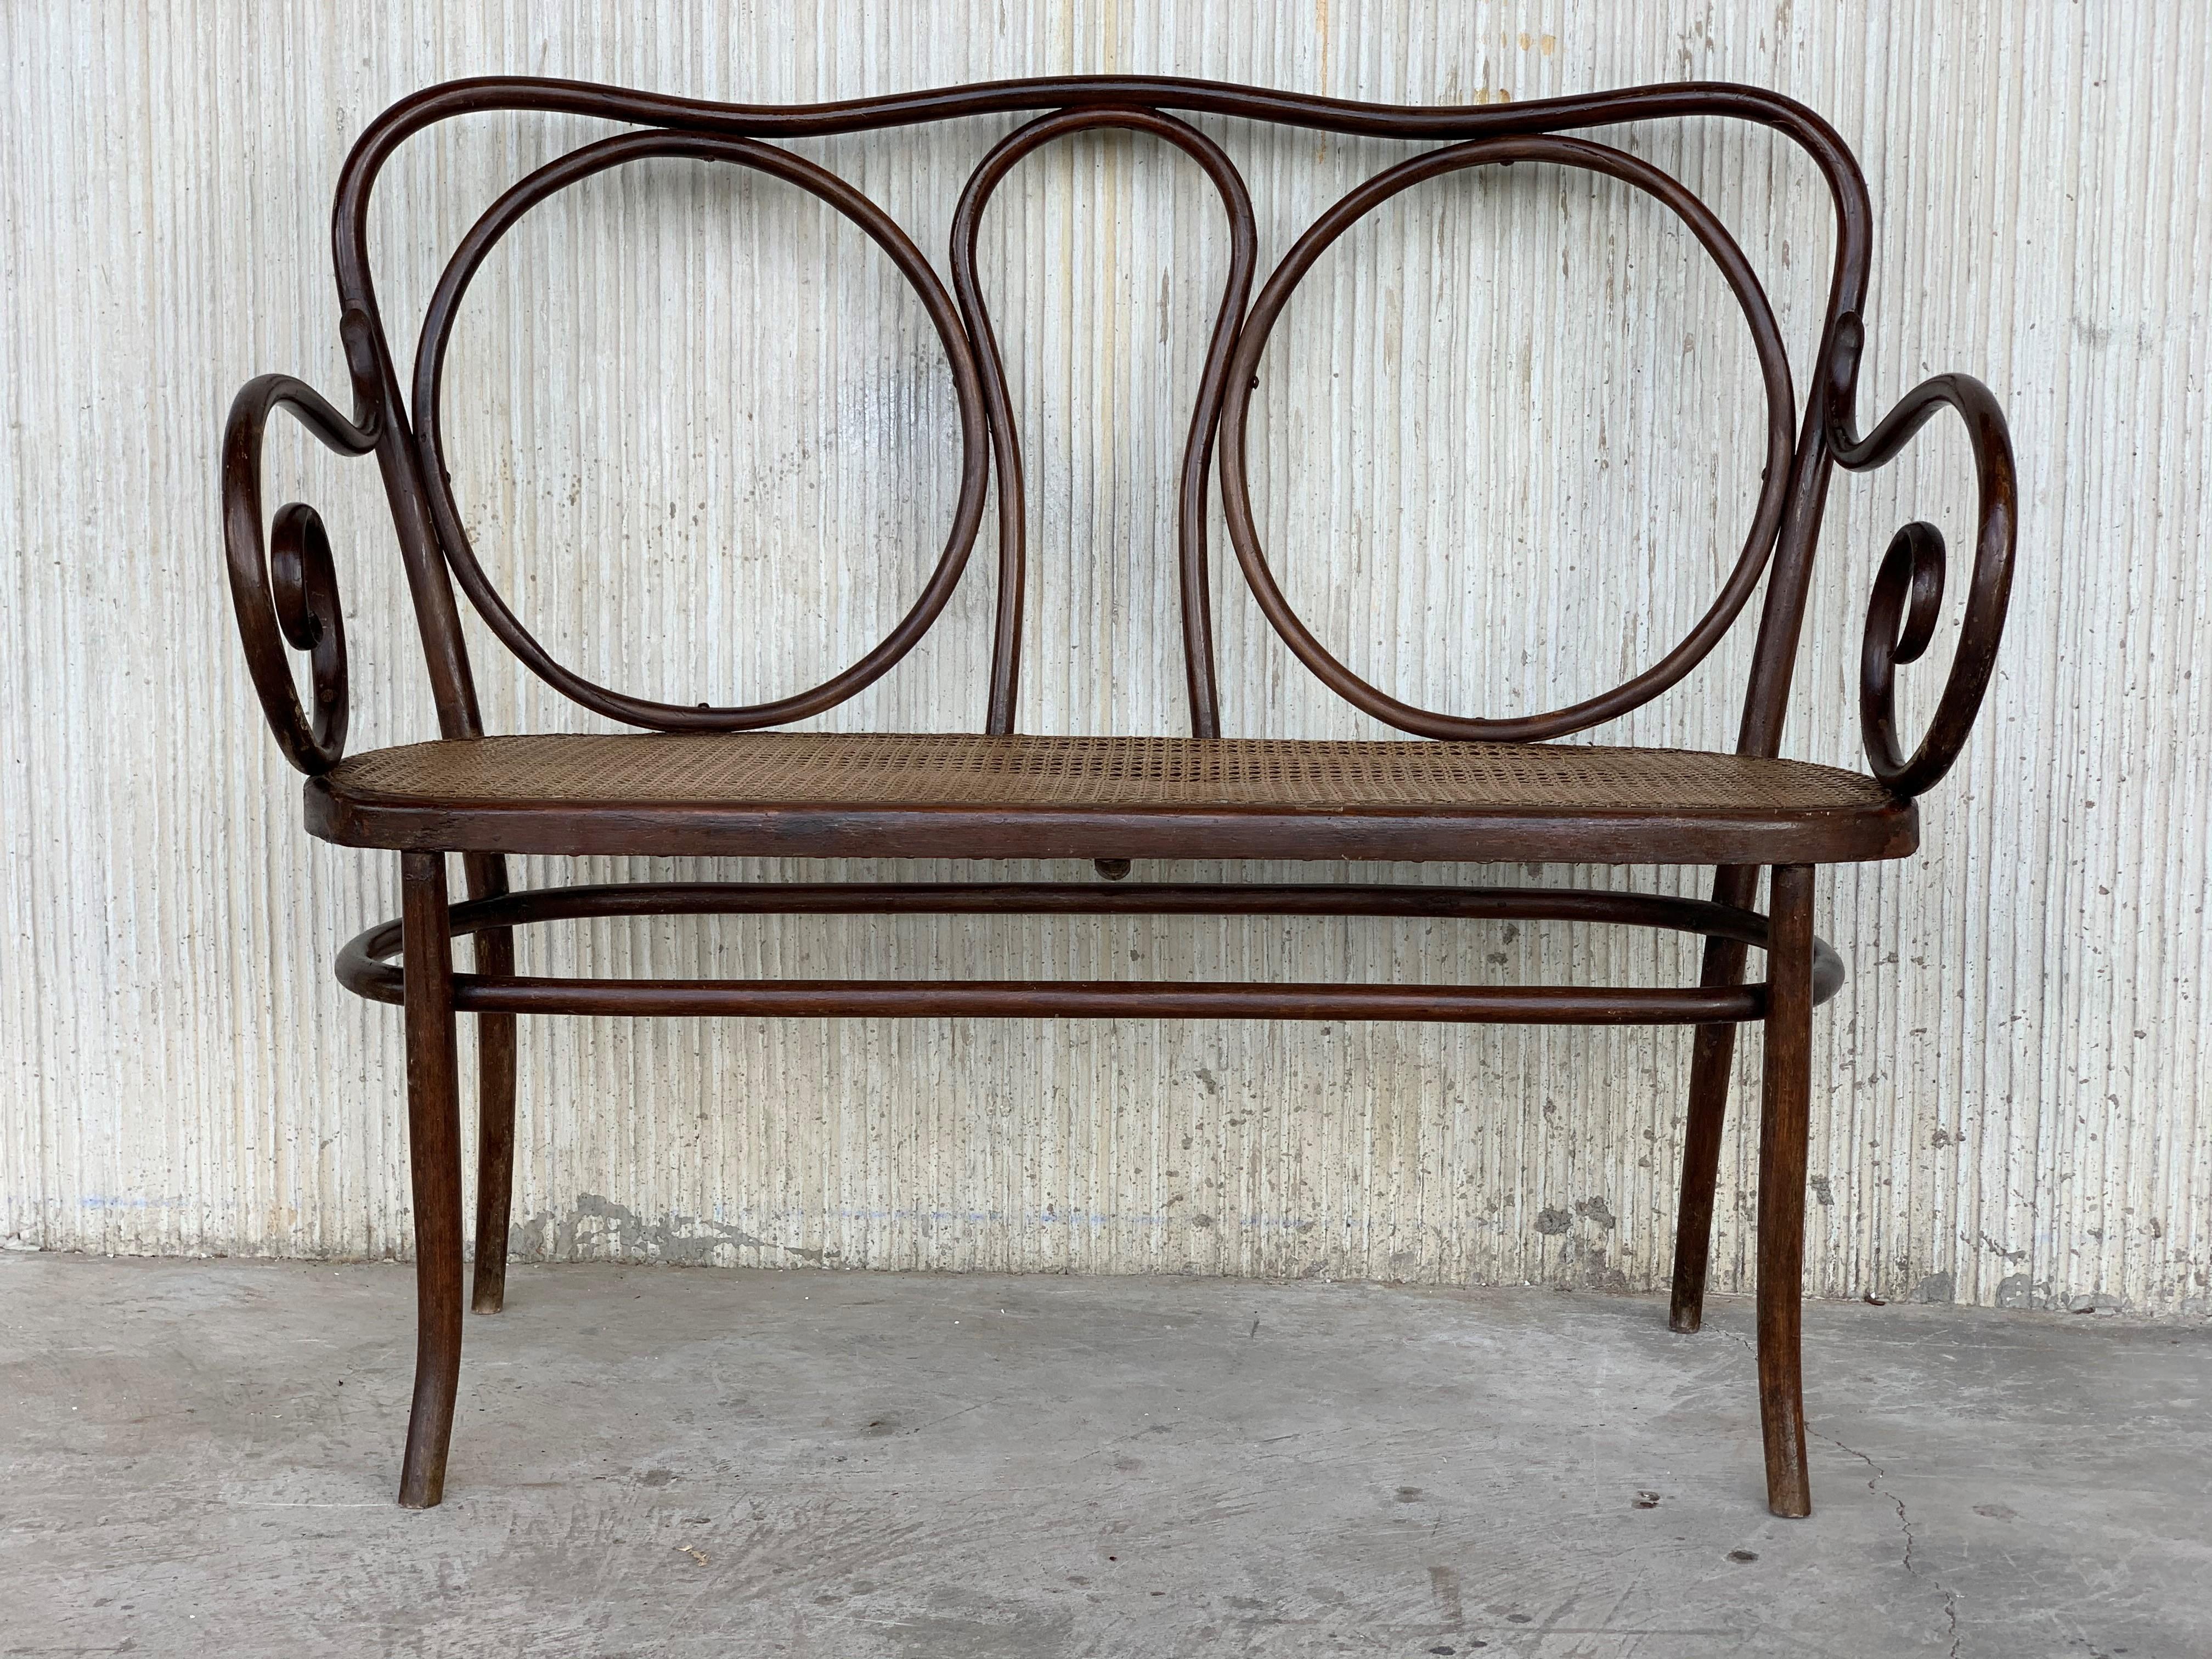 Spanish Colonial 20th Century Bentwood Sofa in the Thonet Style, circa 1925, Caned Seat